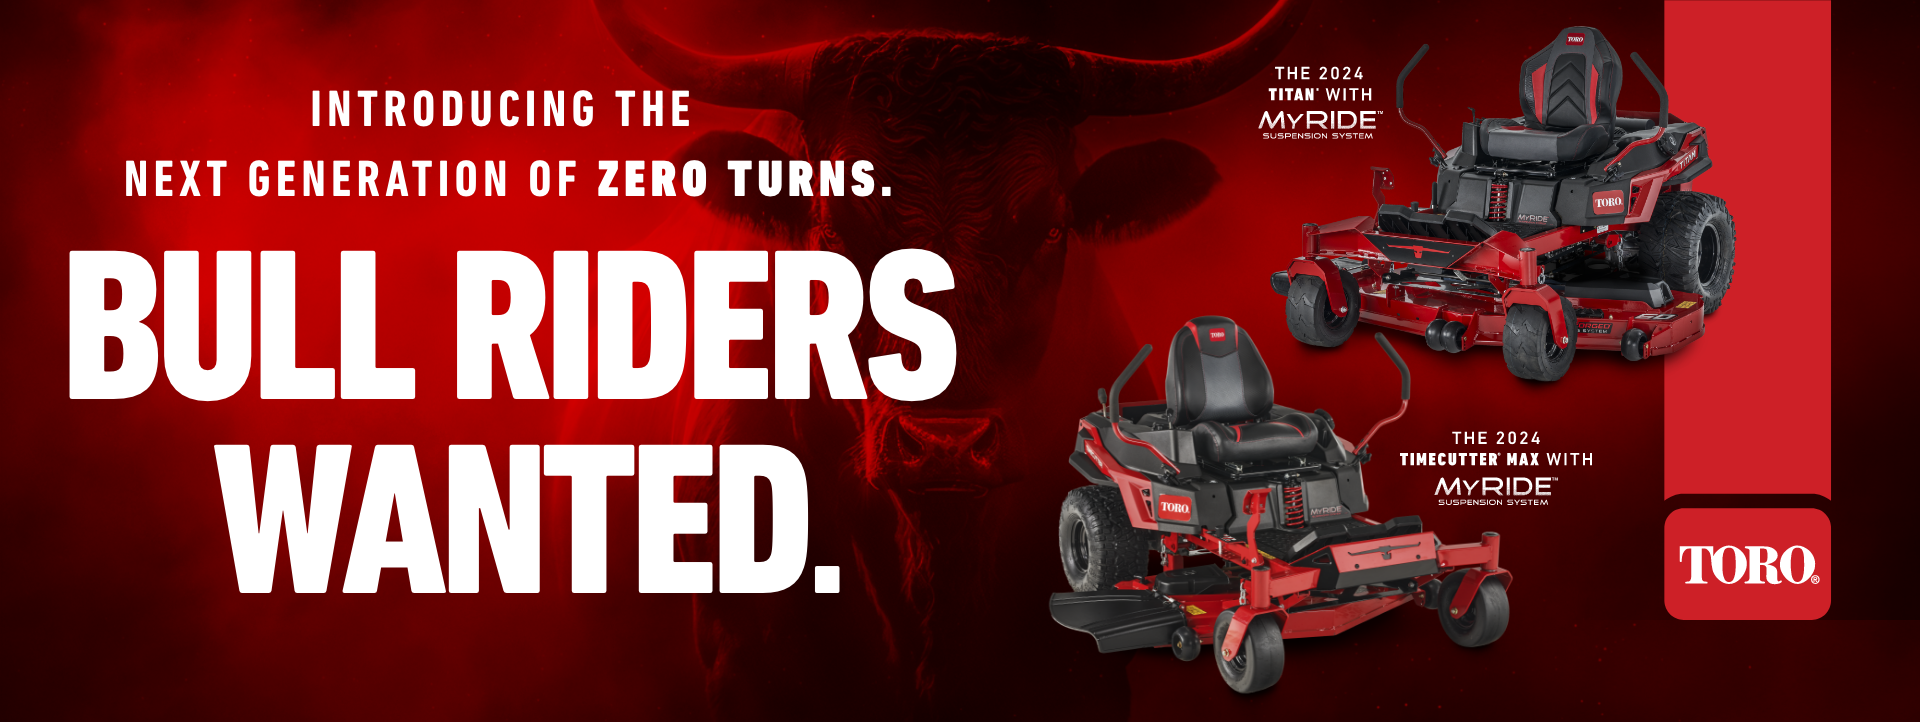 Introducing the Next Generation of Zero Turns. Bull Riders Wanted.